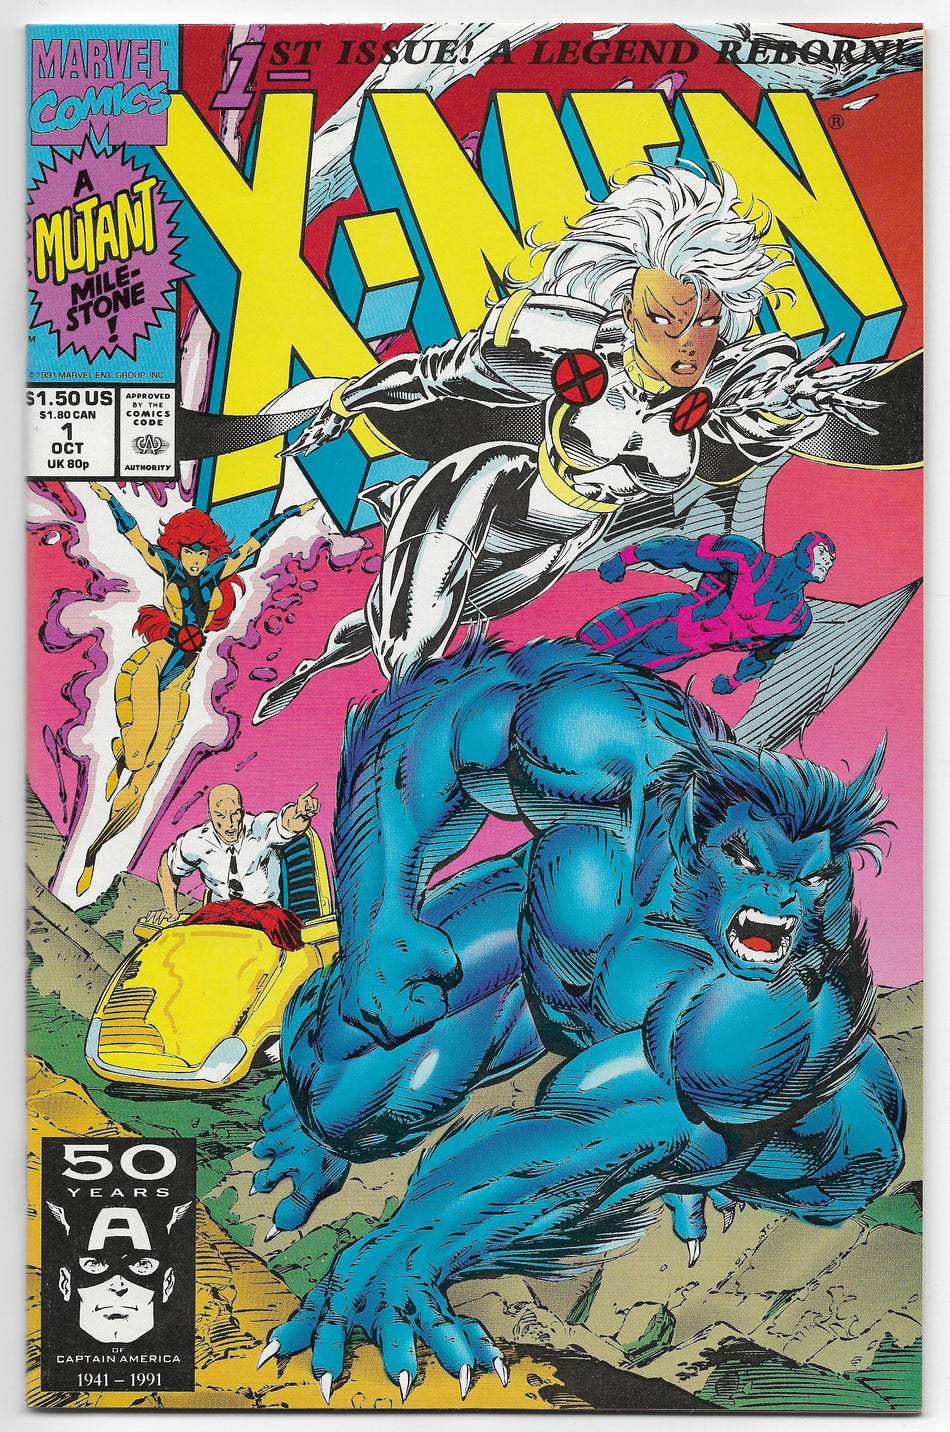 Photo of X-Men, Vol. 1 (1991)  Iss 1A Near Mint  Comic sold by Stronghold Collectibles